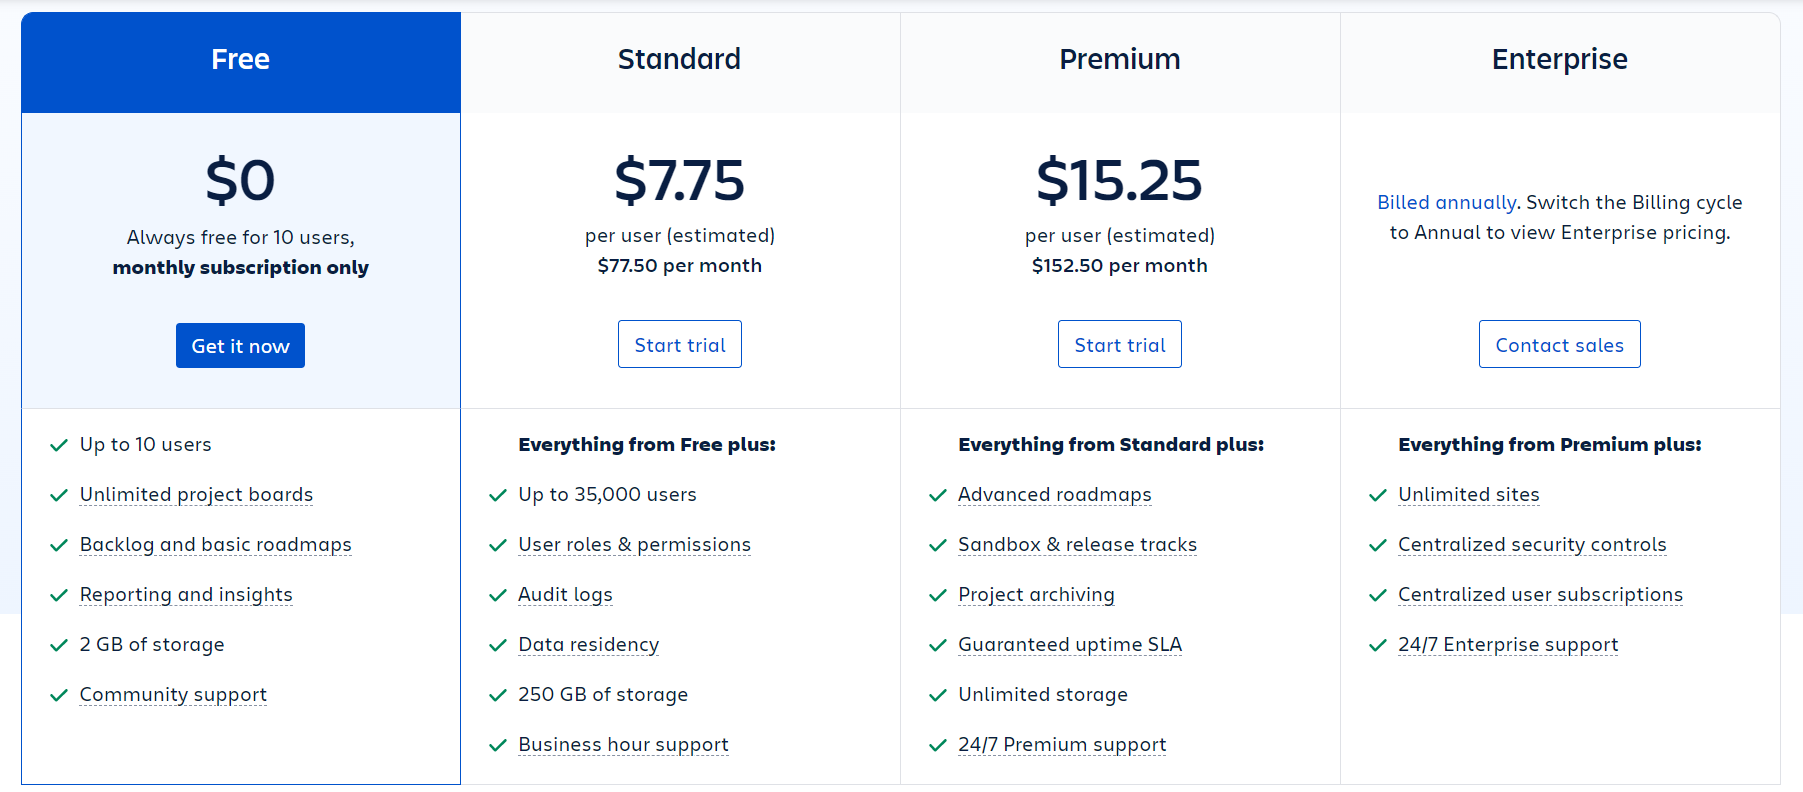 Pricing plans of Jira, with Free plan for $0 to Premium plan for $15.25